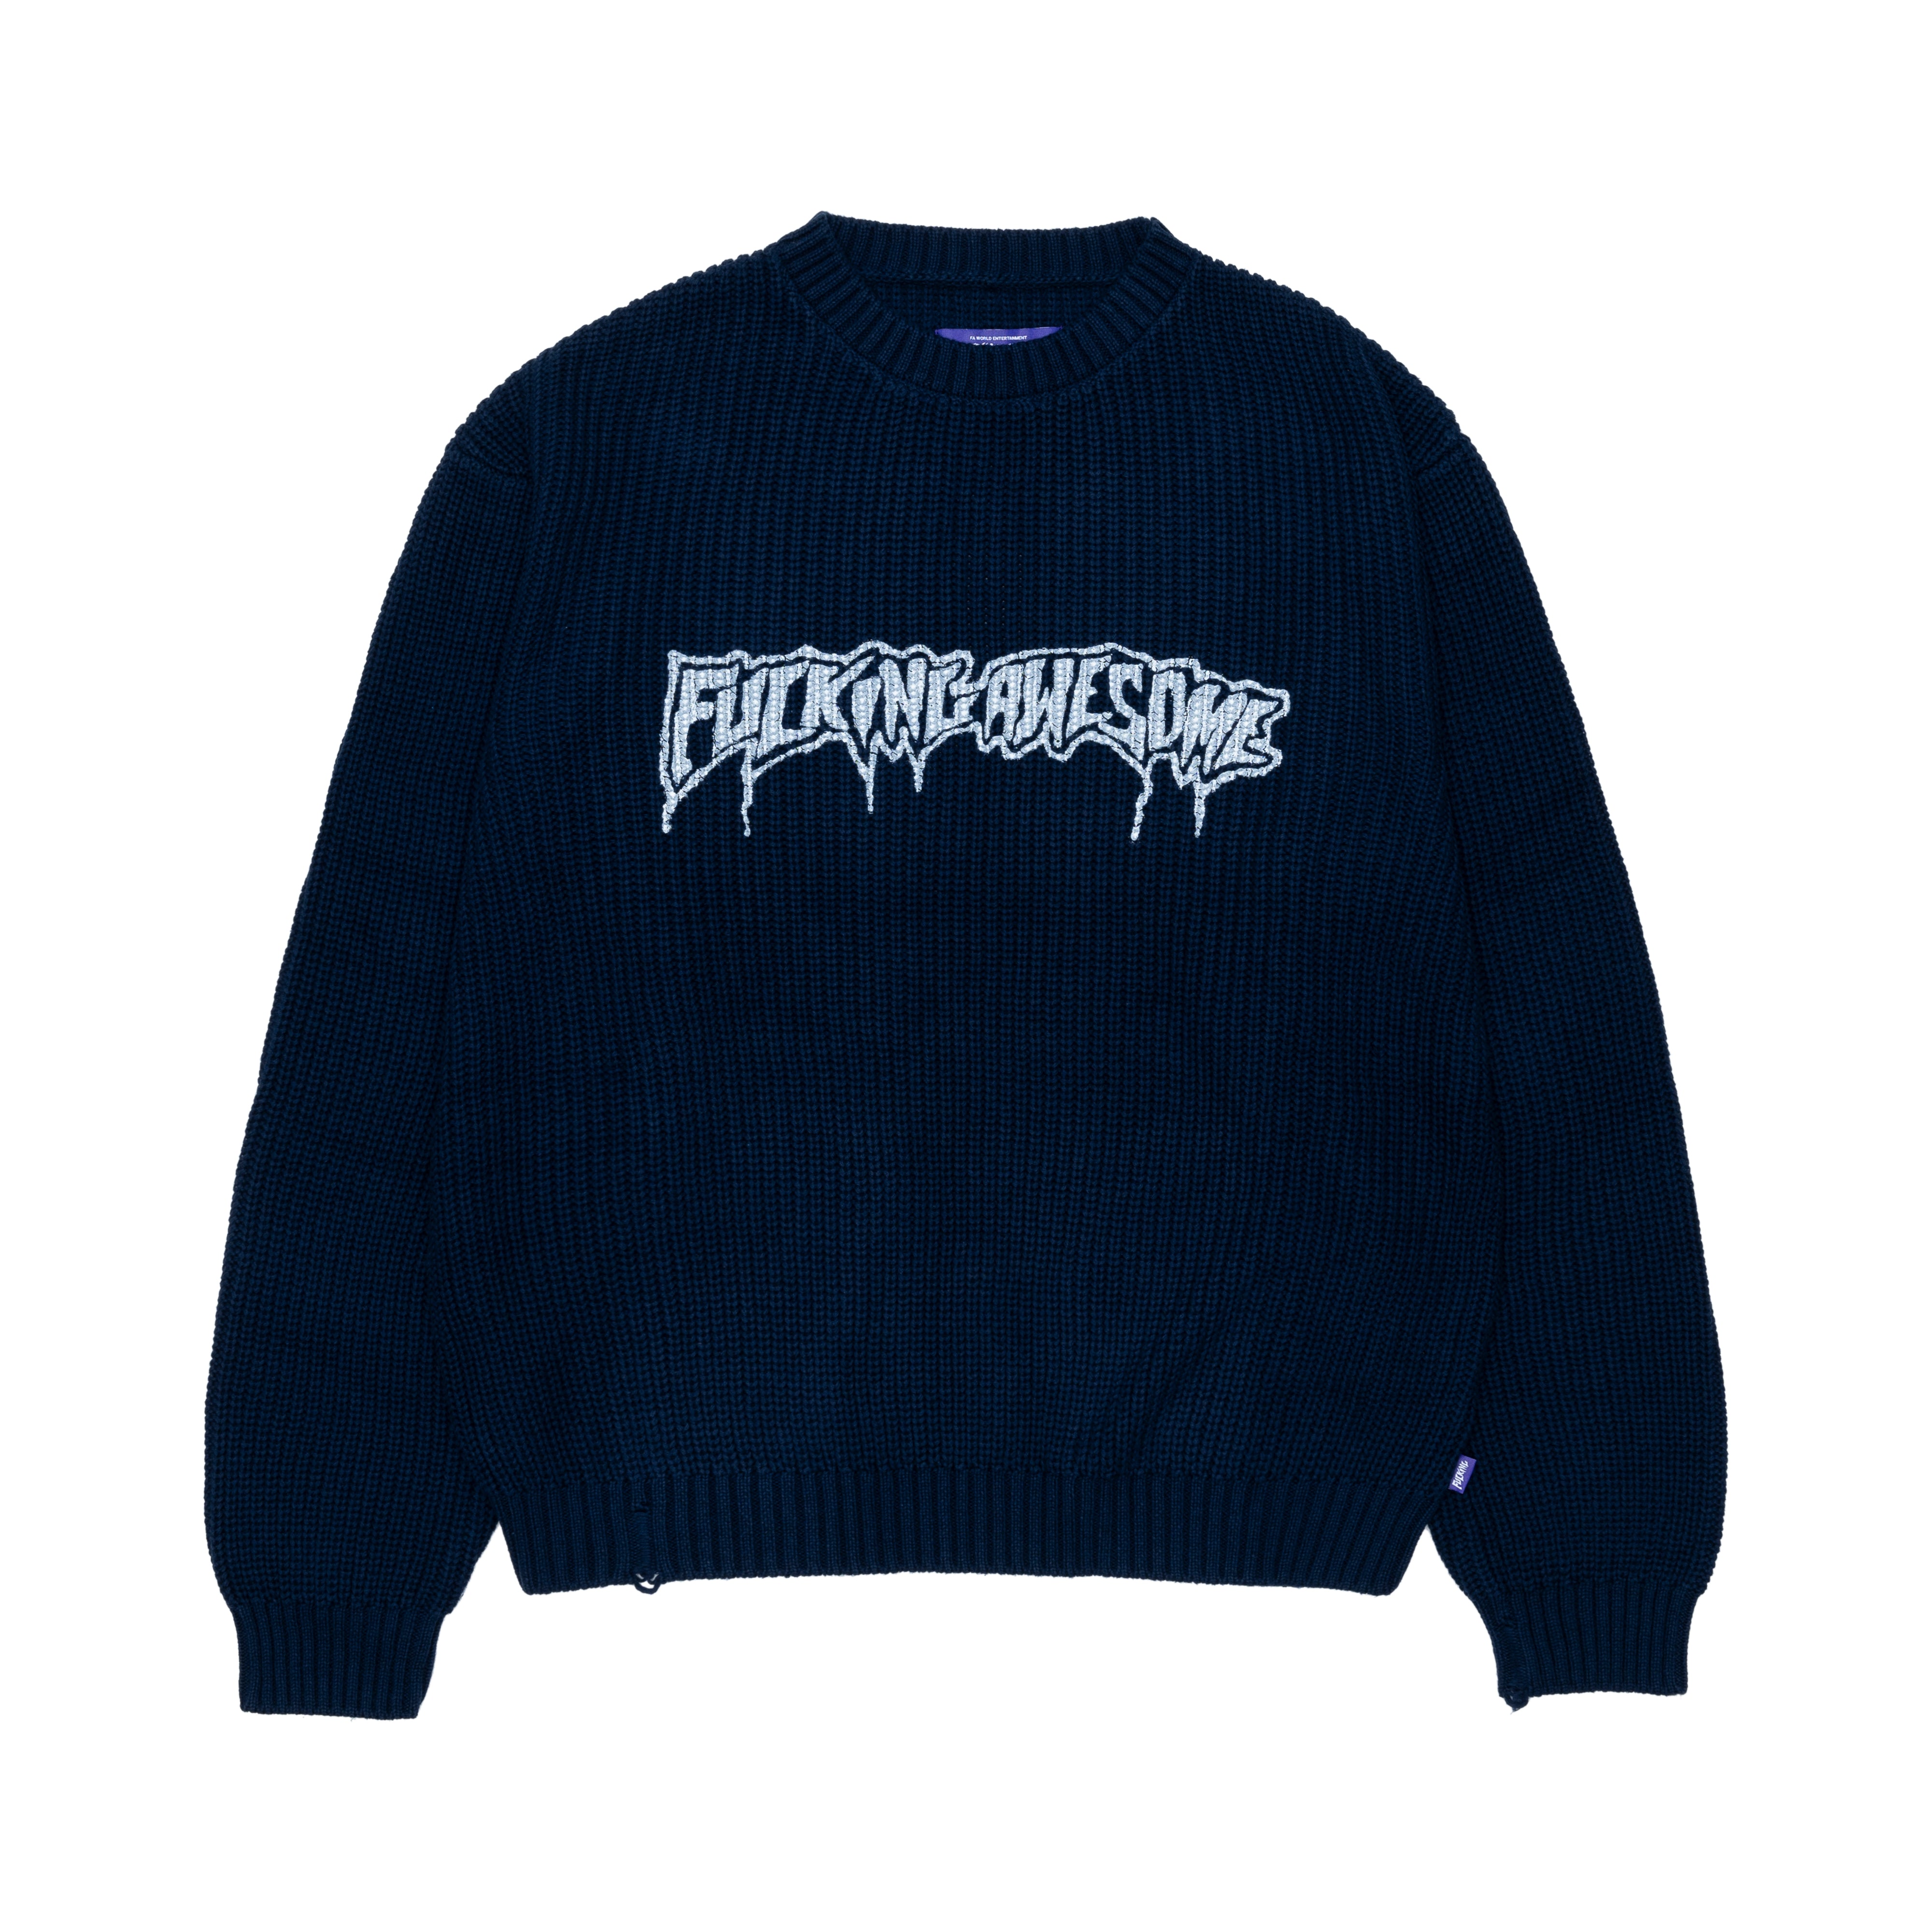 fucking awesome sweaterファッション